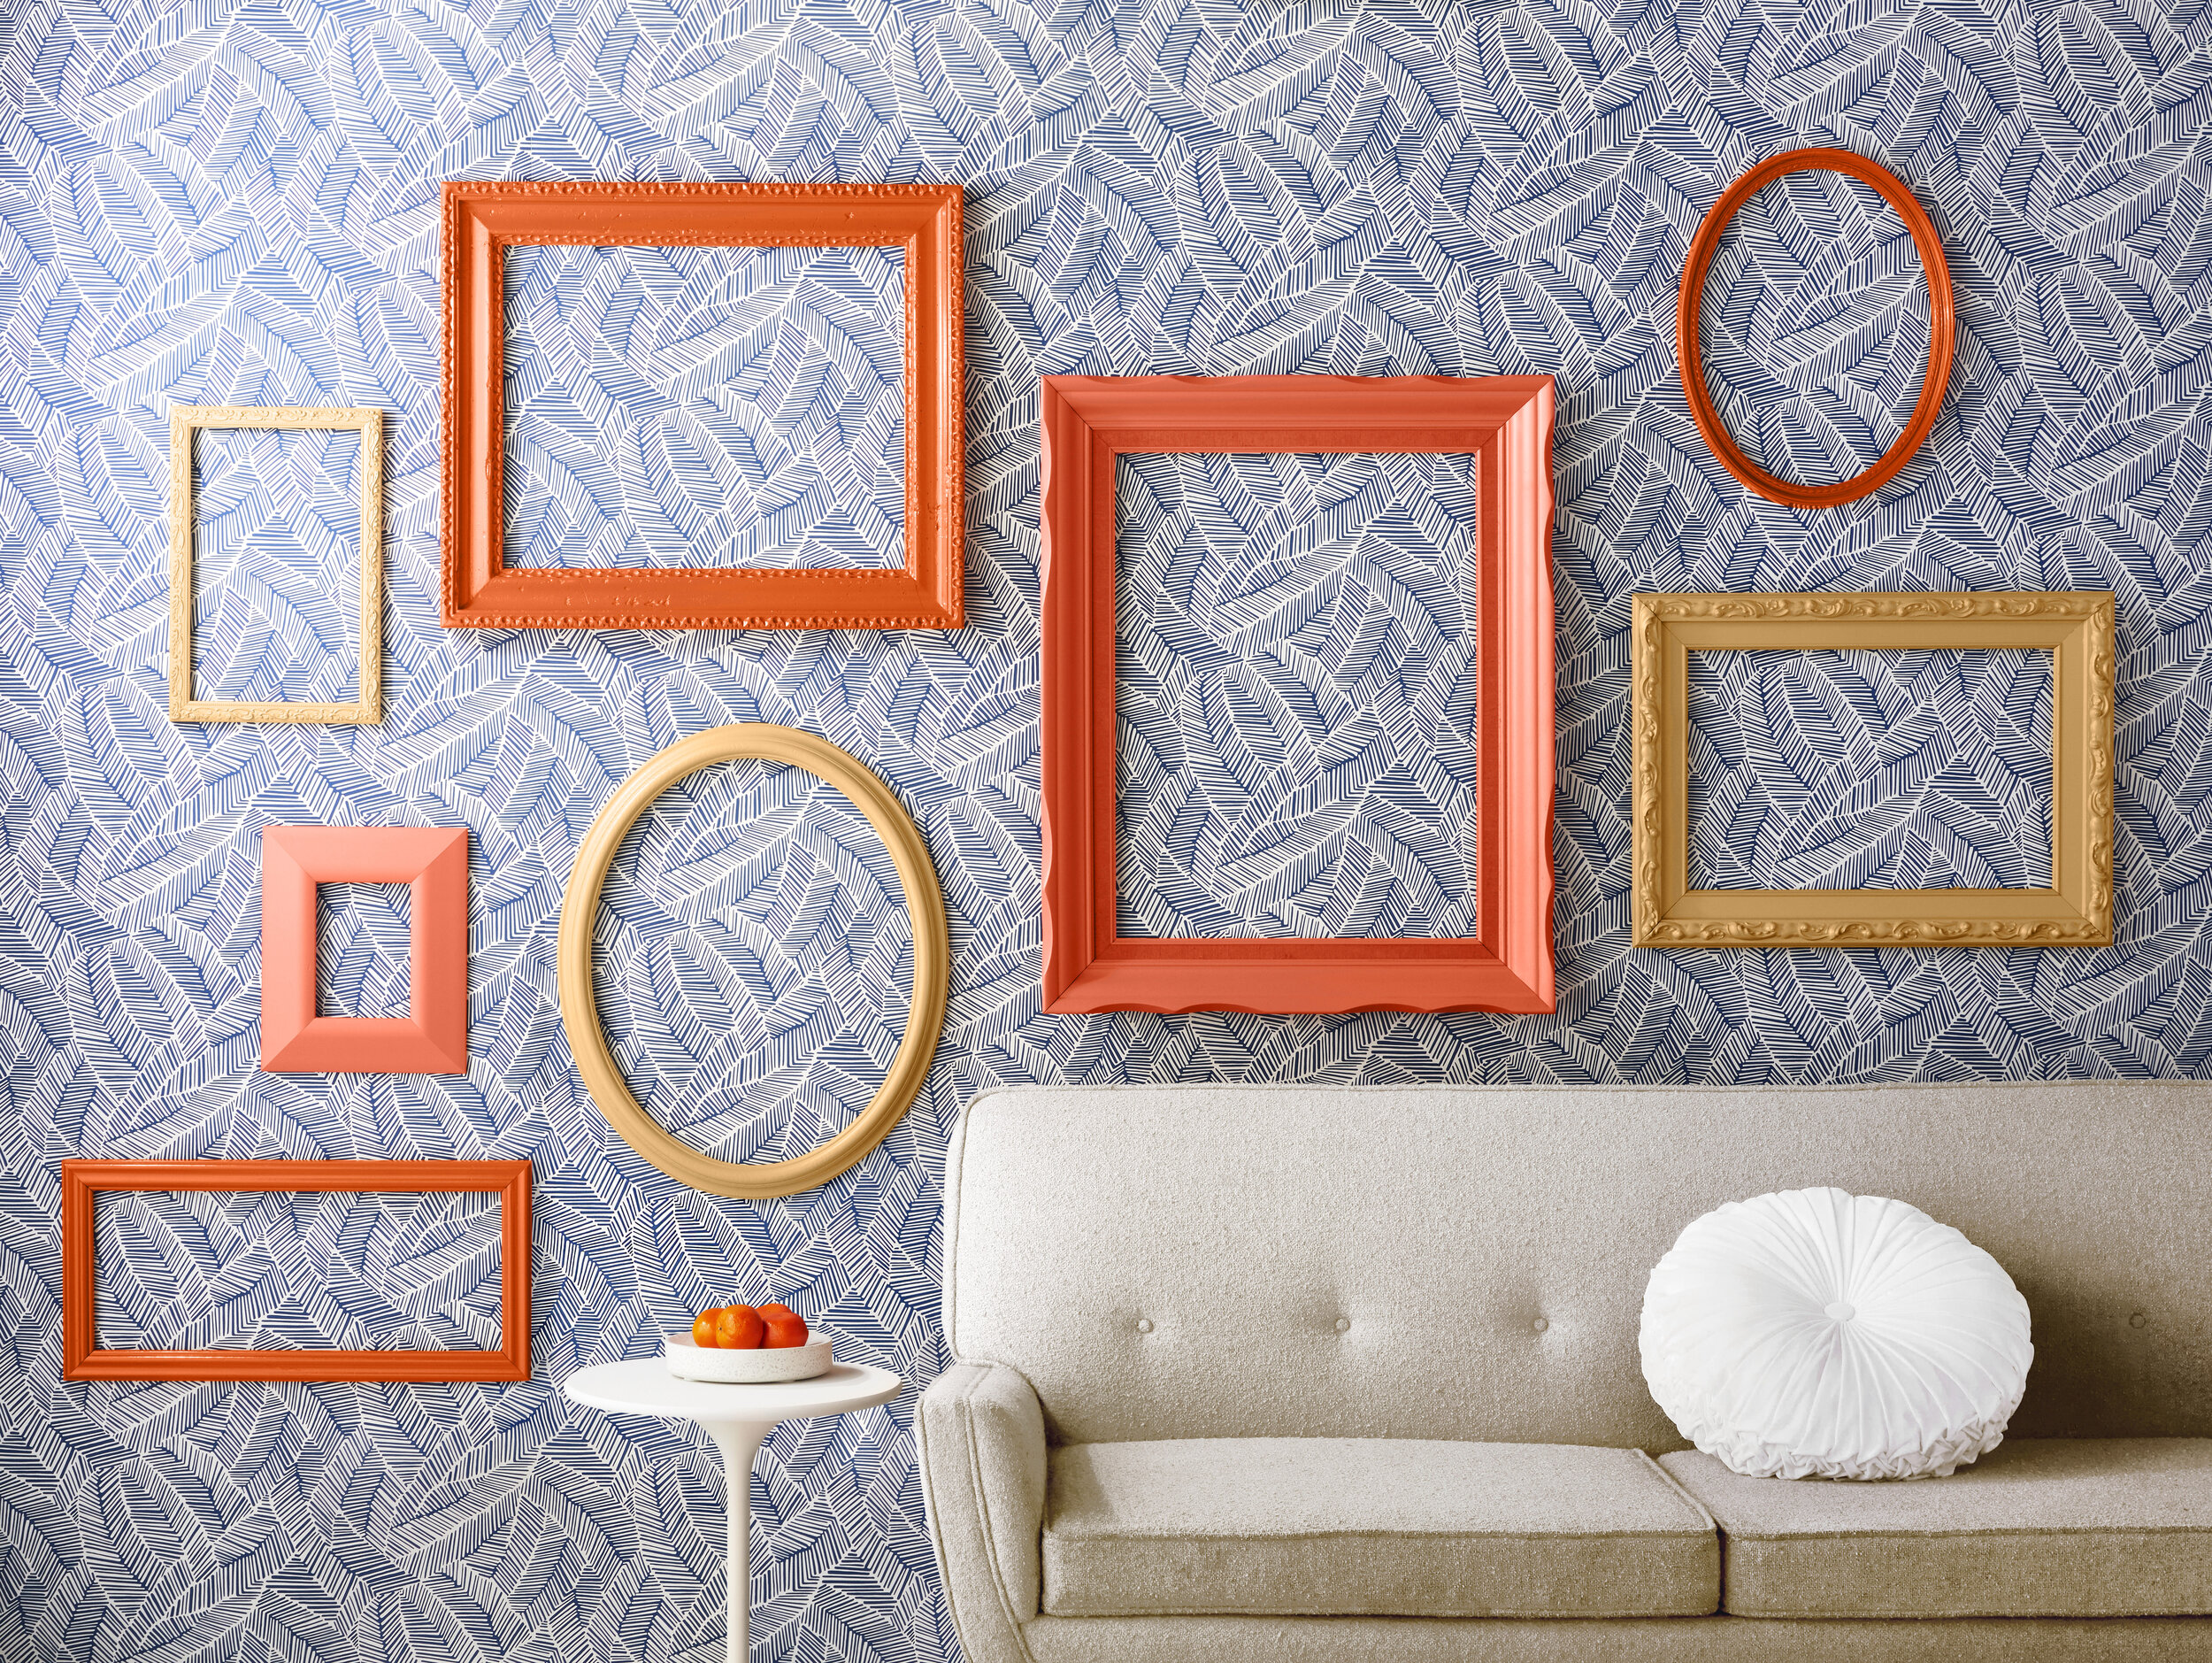 pictureframes-lifestyle-colormaxx.jpg